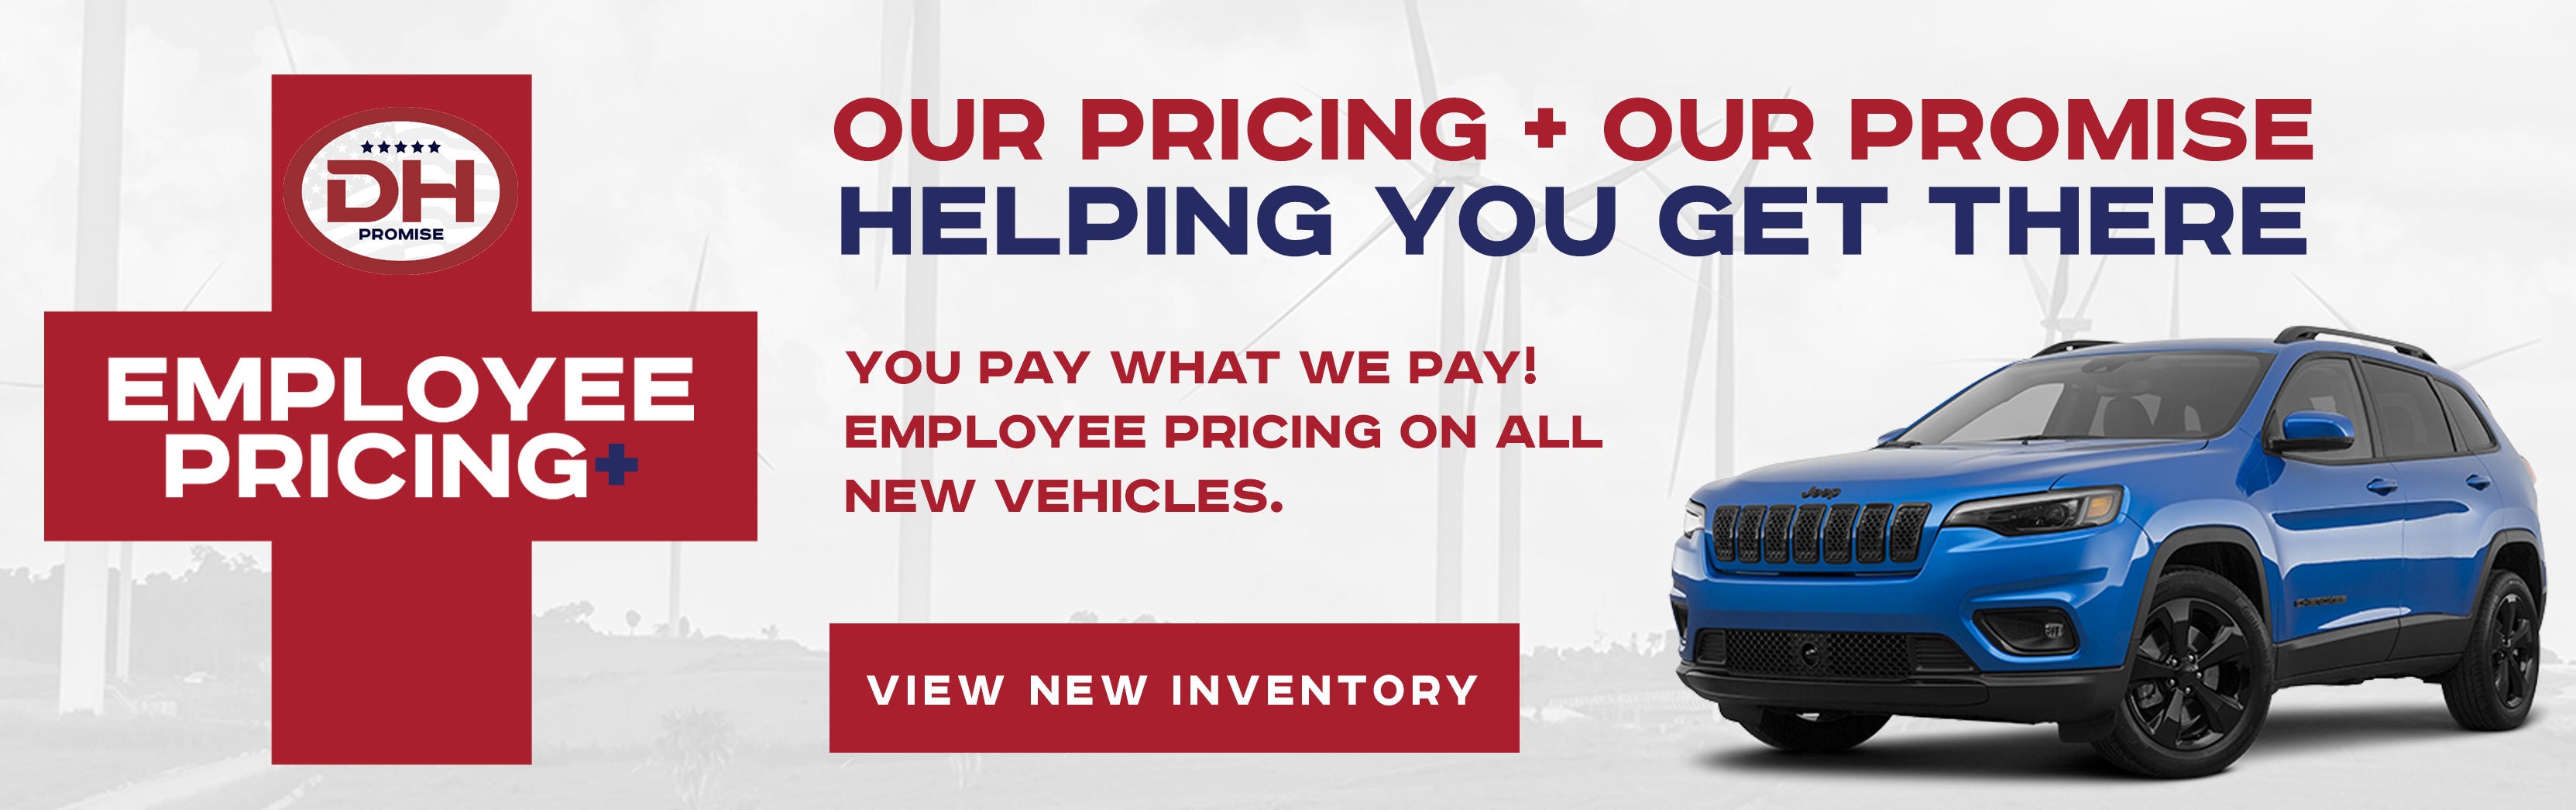 Employee Pricing on All New Vehicles